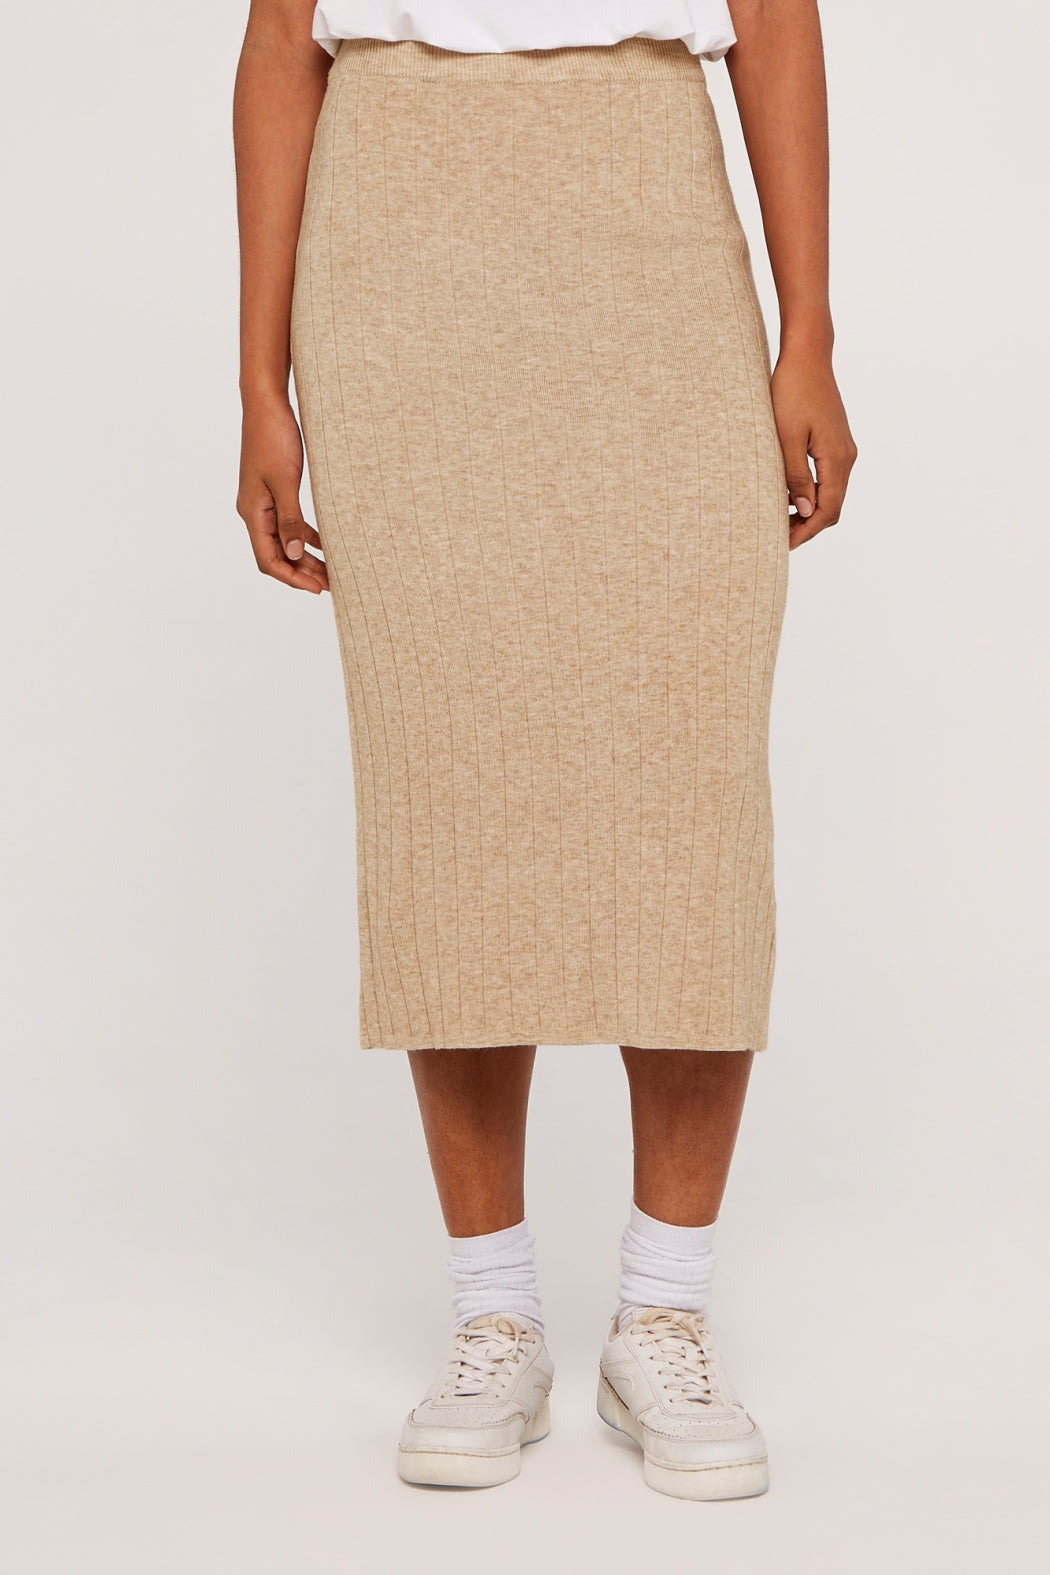 Stone Ribbed Knit Skirt | Apricot - Clearance